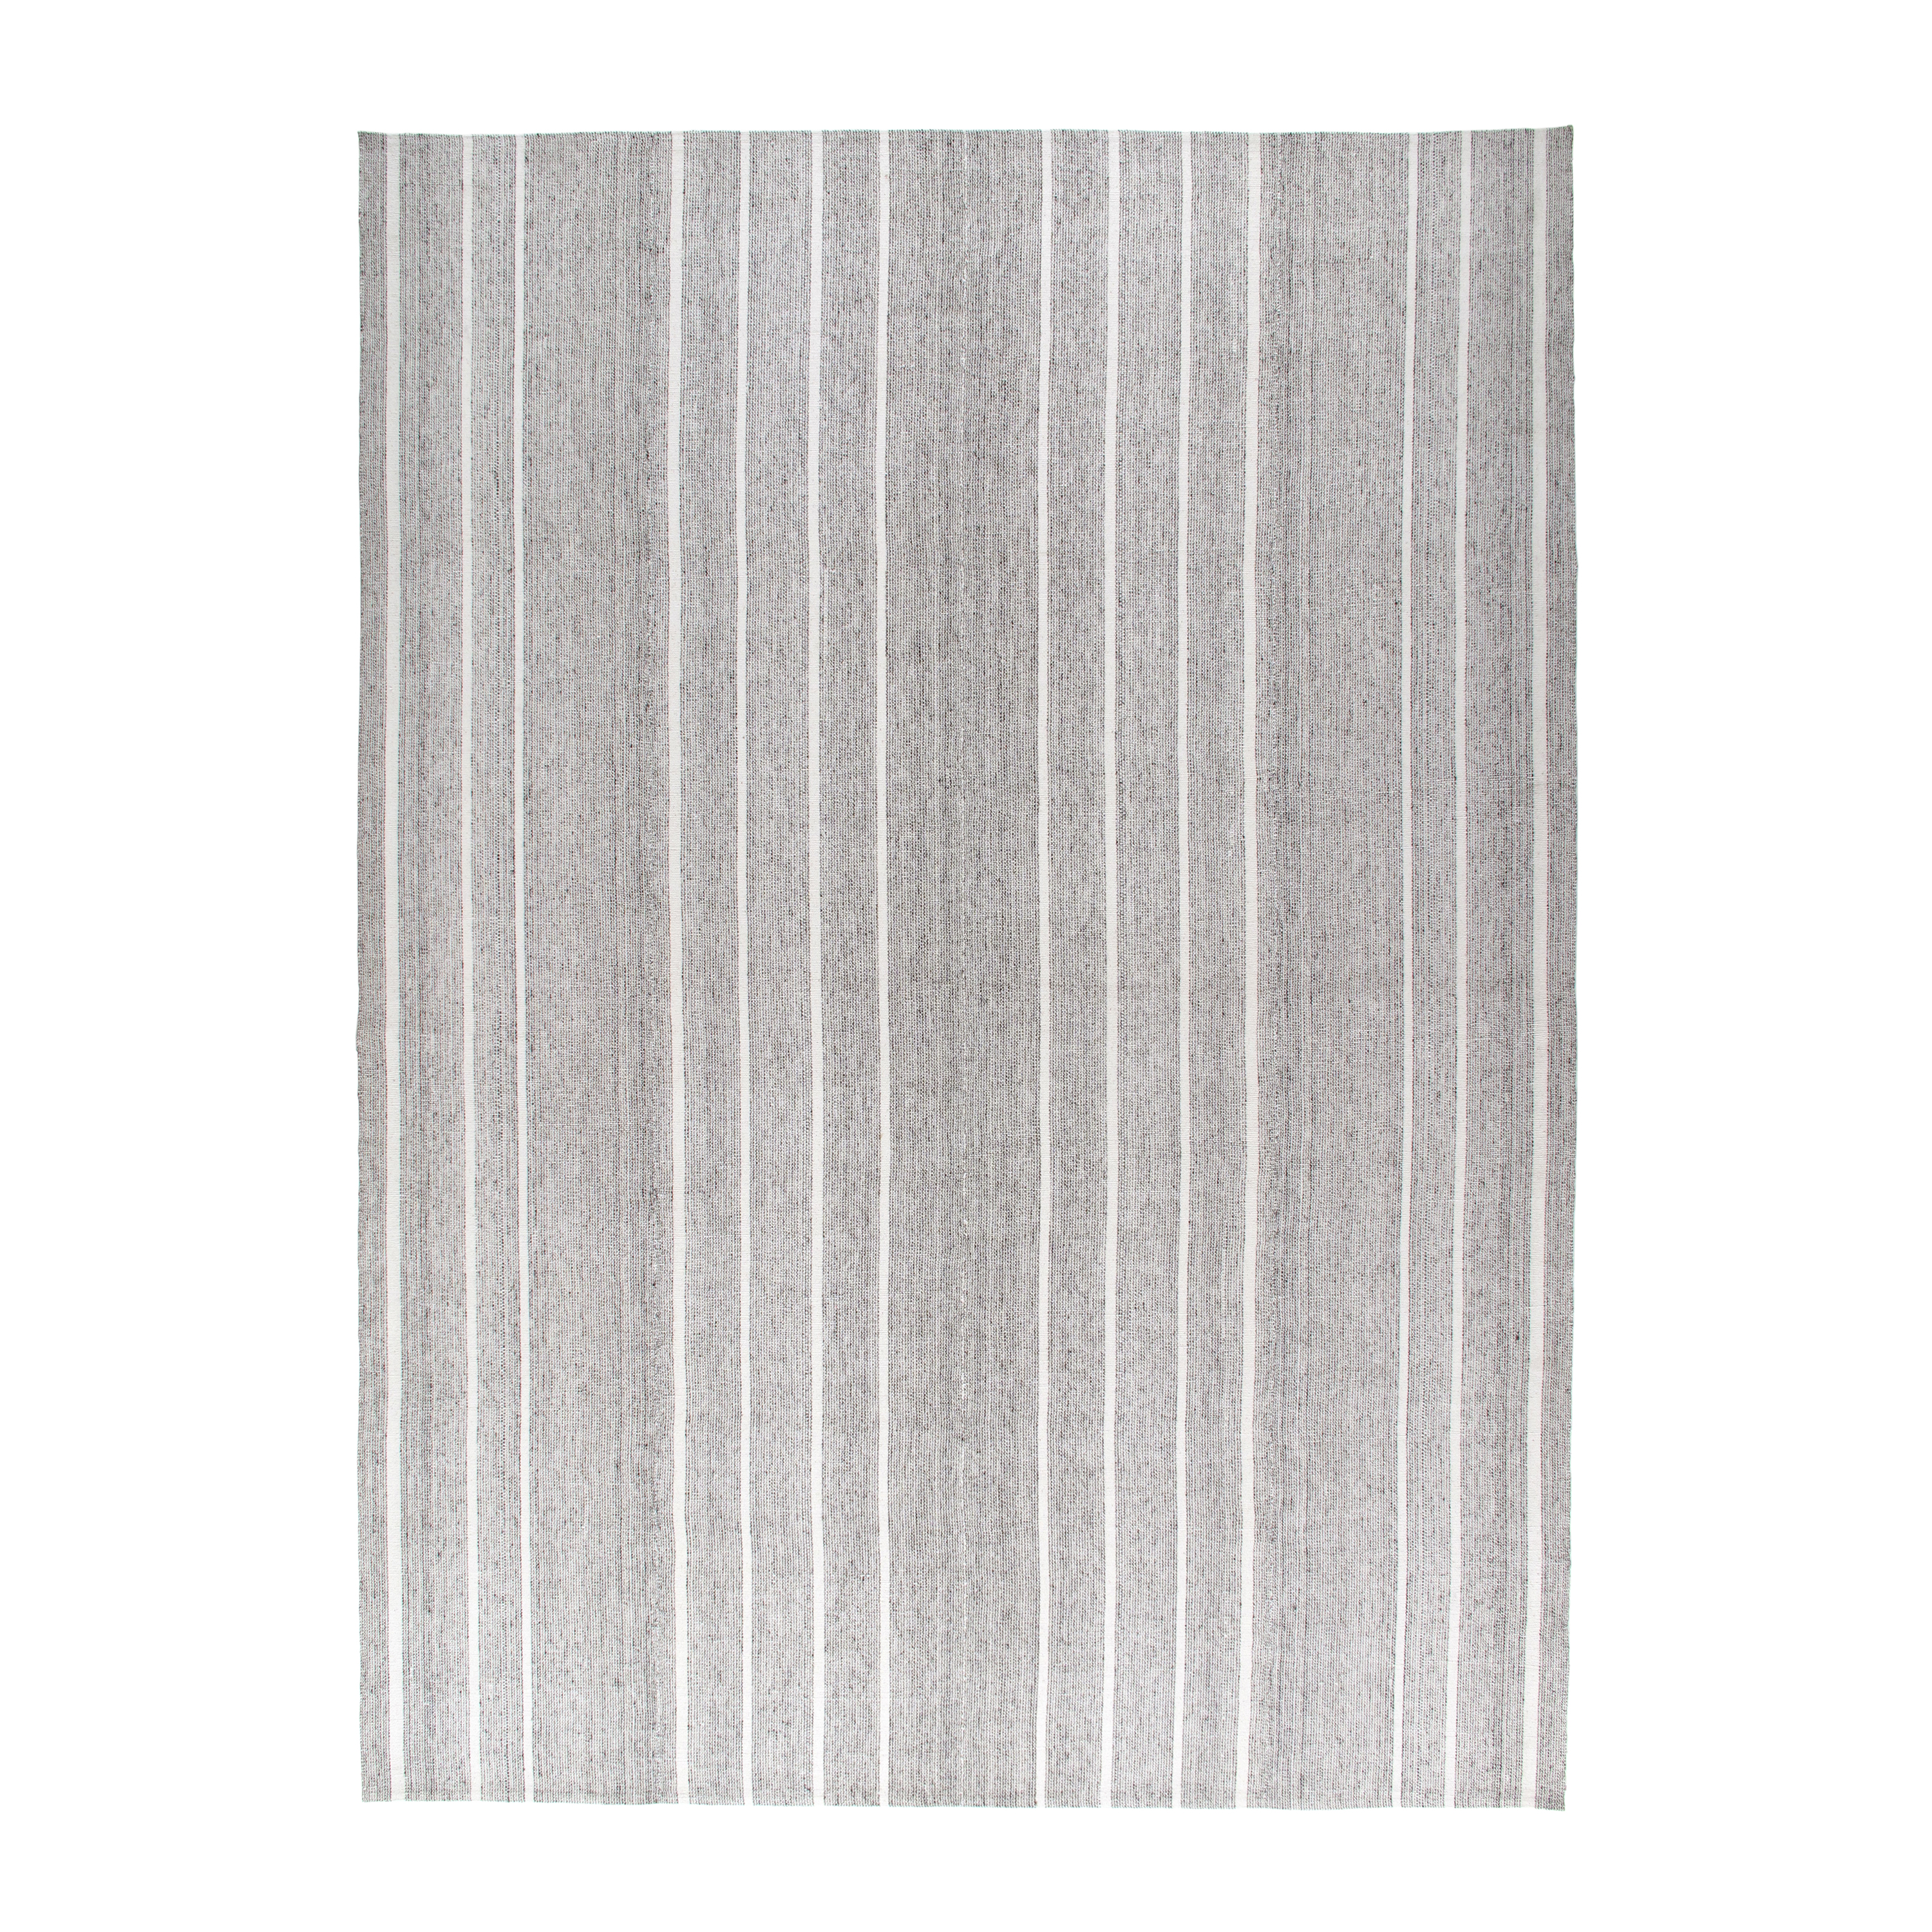 This Pelas rug flatweave rug is made with handspun wool and cotton and natural dyes. 